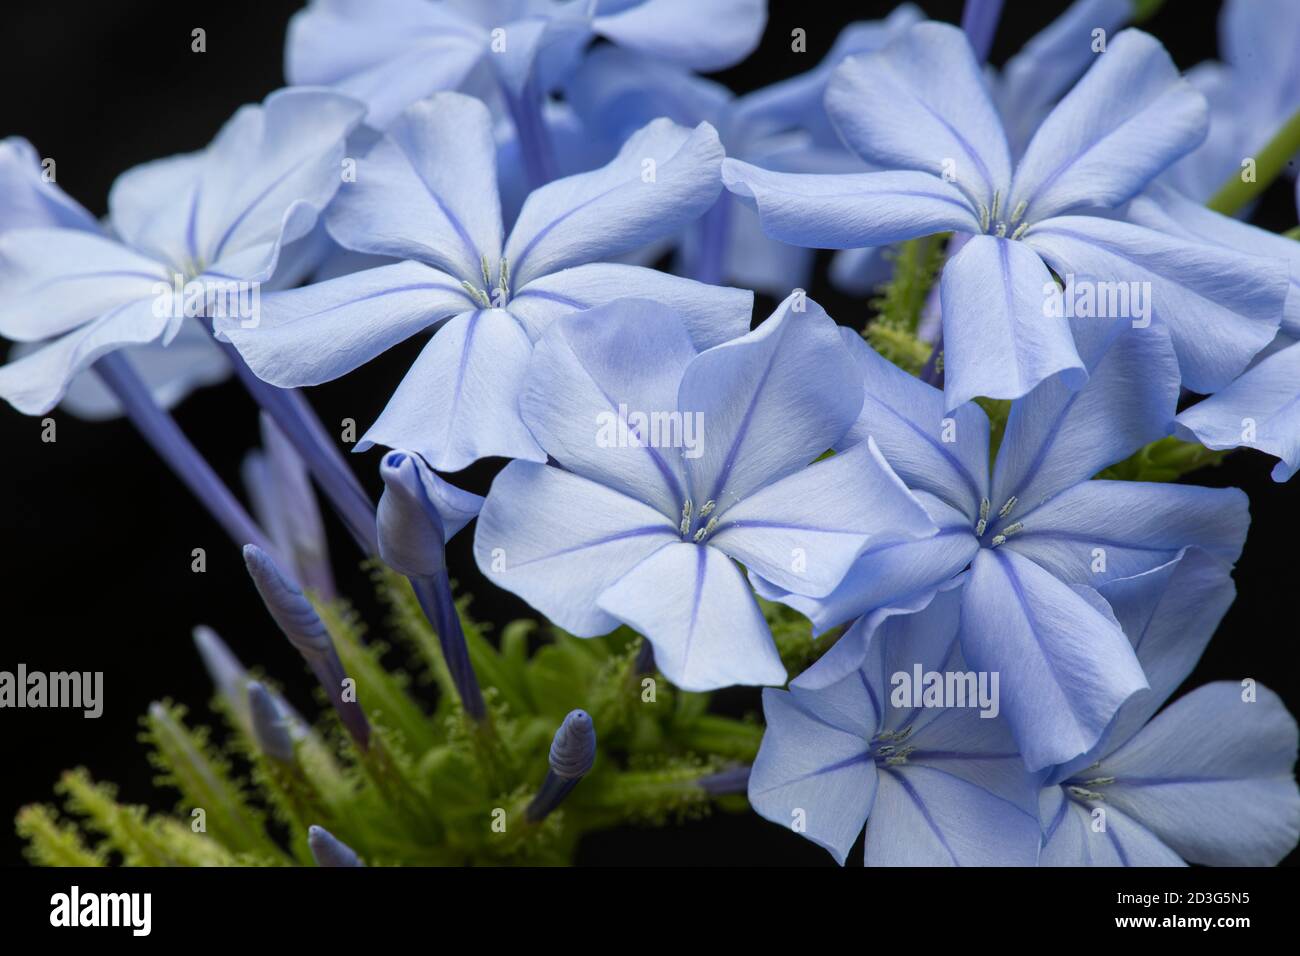 Plumbago in flower with buds Stock Photo